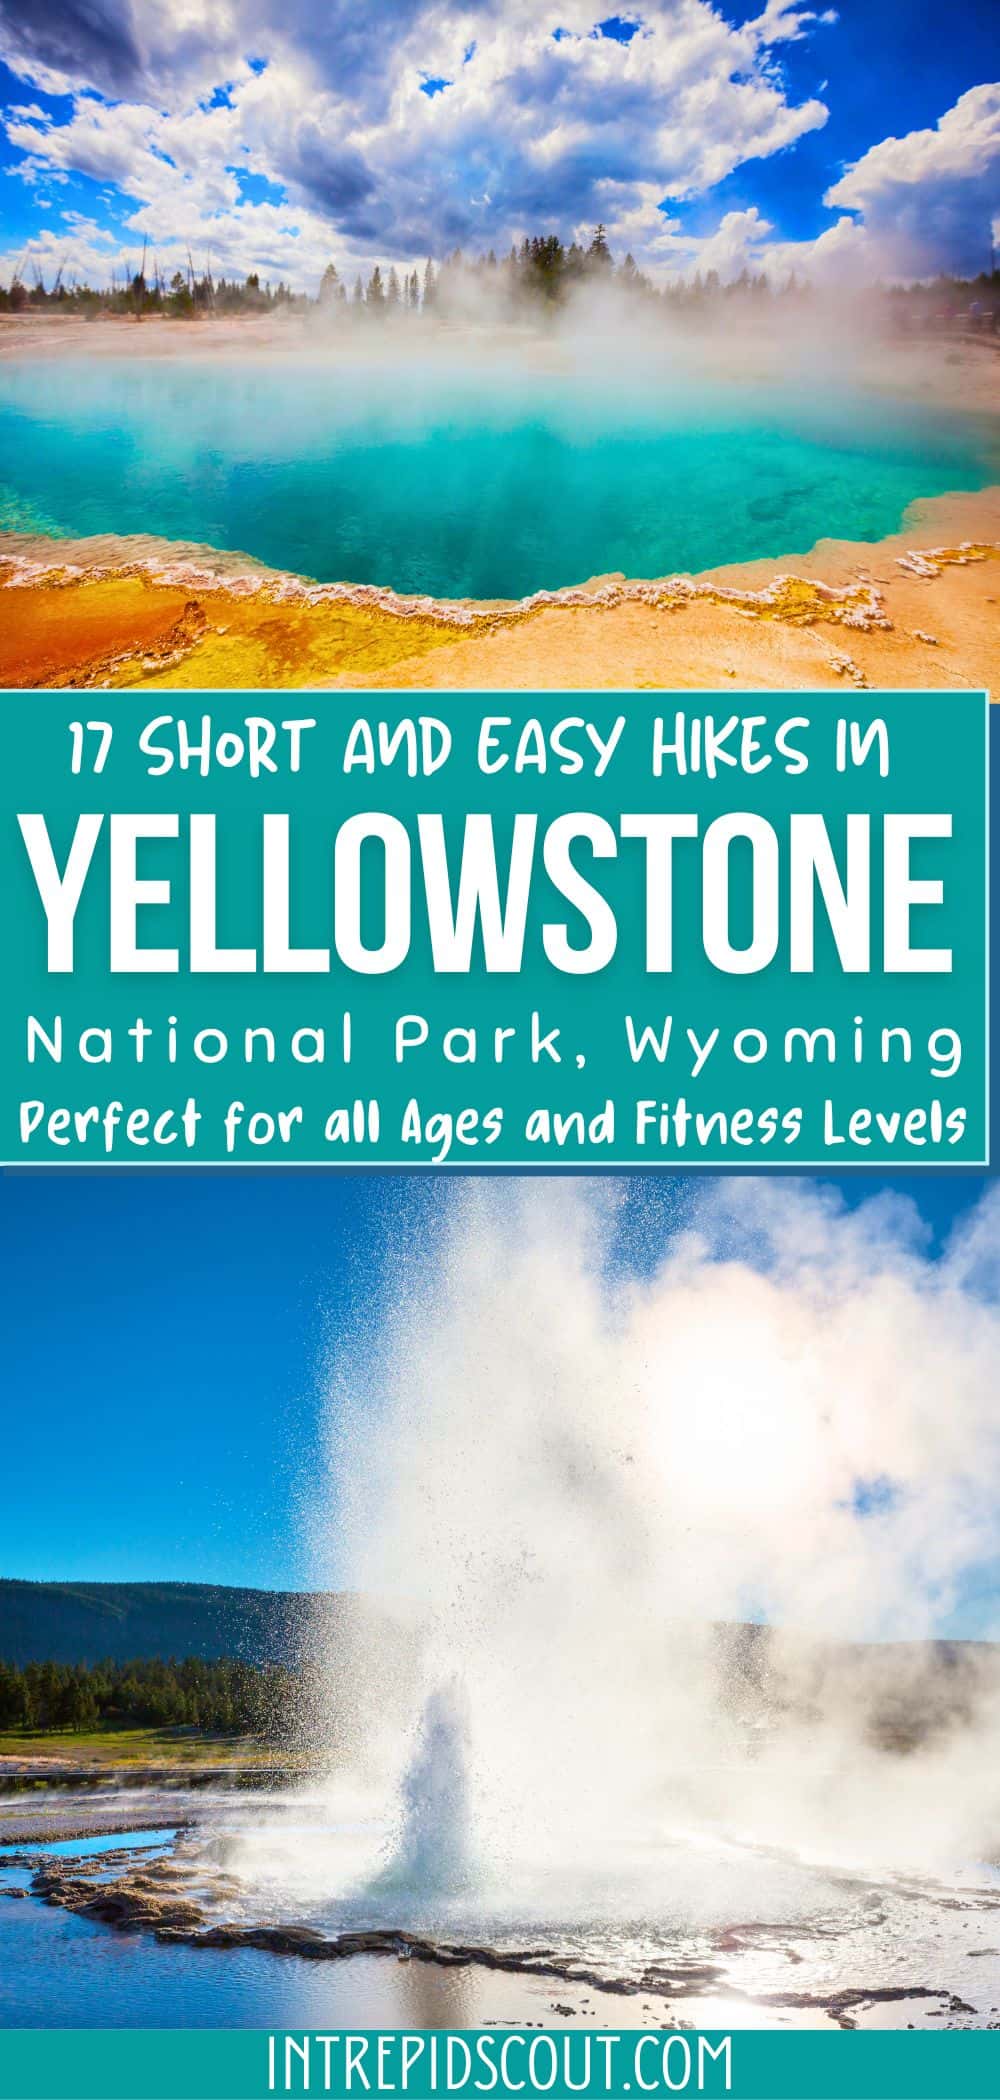 Short and Easy Hikes in Yellowstone